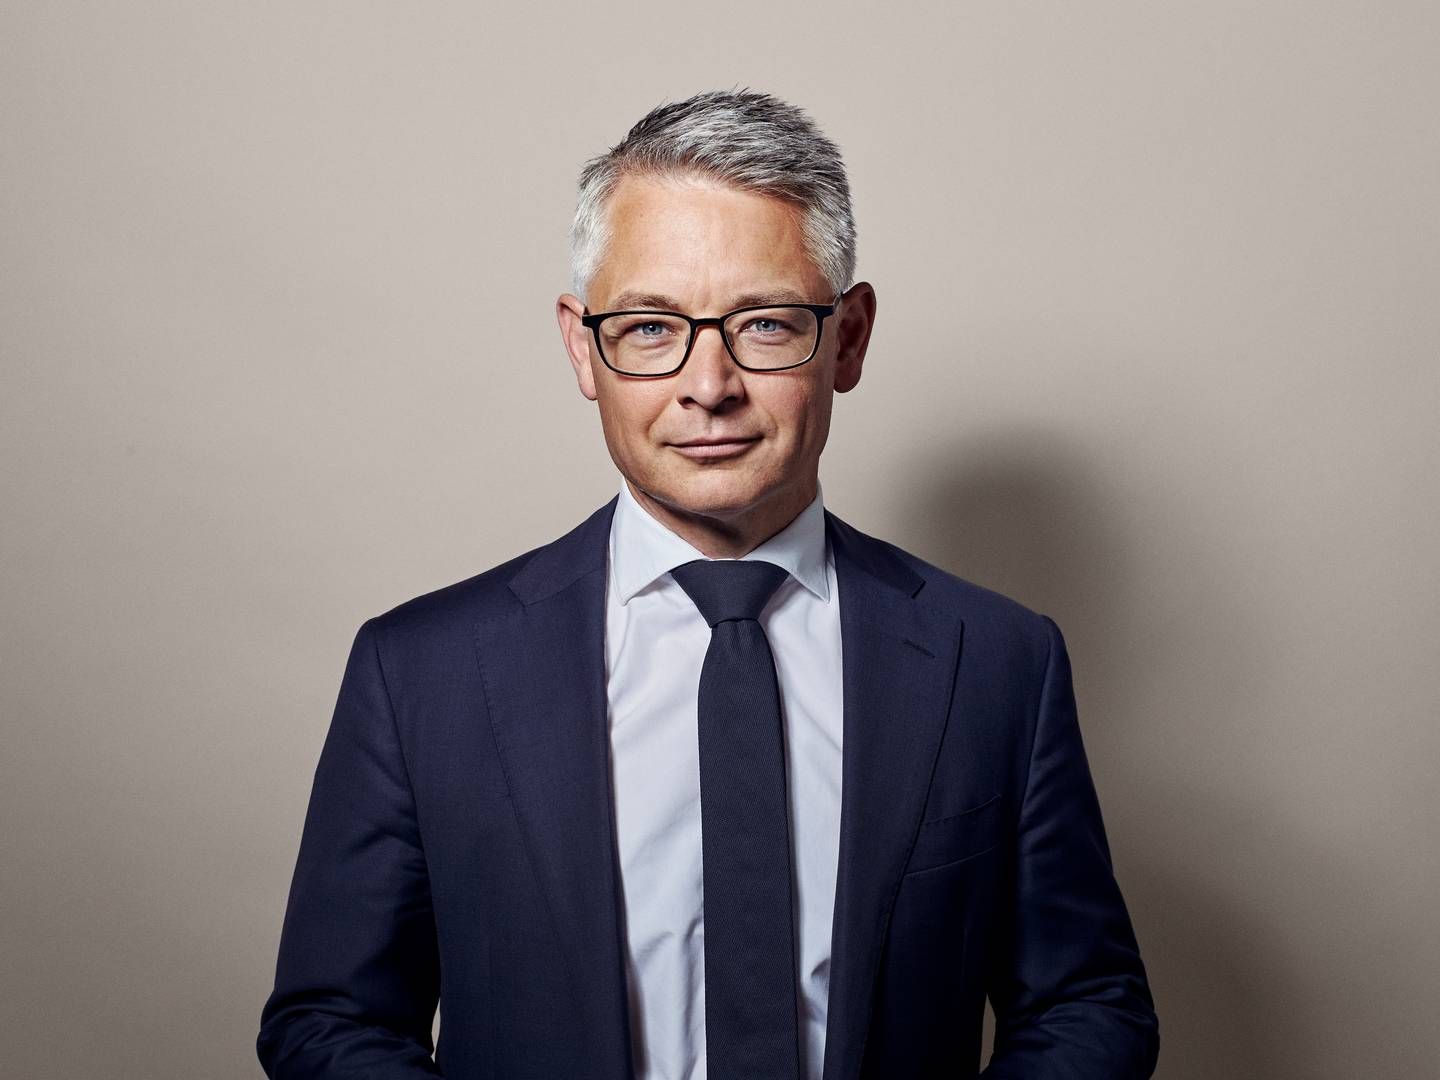 It is the third time Ralf Magnussen, CEO at Nykredit Asset Management, is performing an interview about Nykredit's quarterly results, after the head of Wealth Management, Peter Kjærgaard, quit to become CEO at Danish asset manager Formuepleje. | Foto: Pr/ap Pension